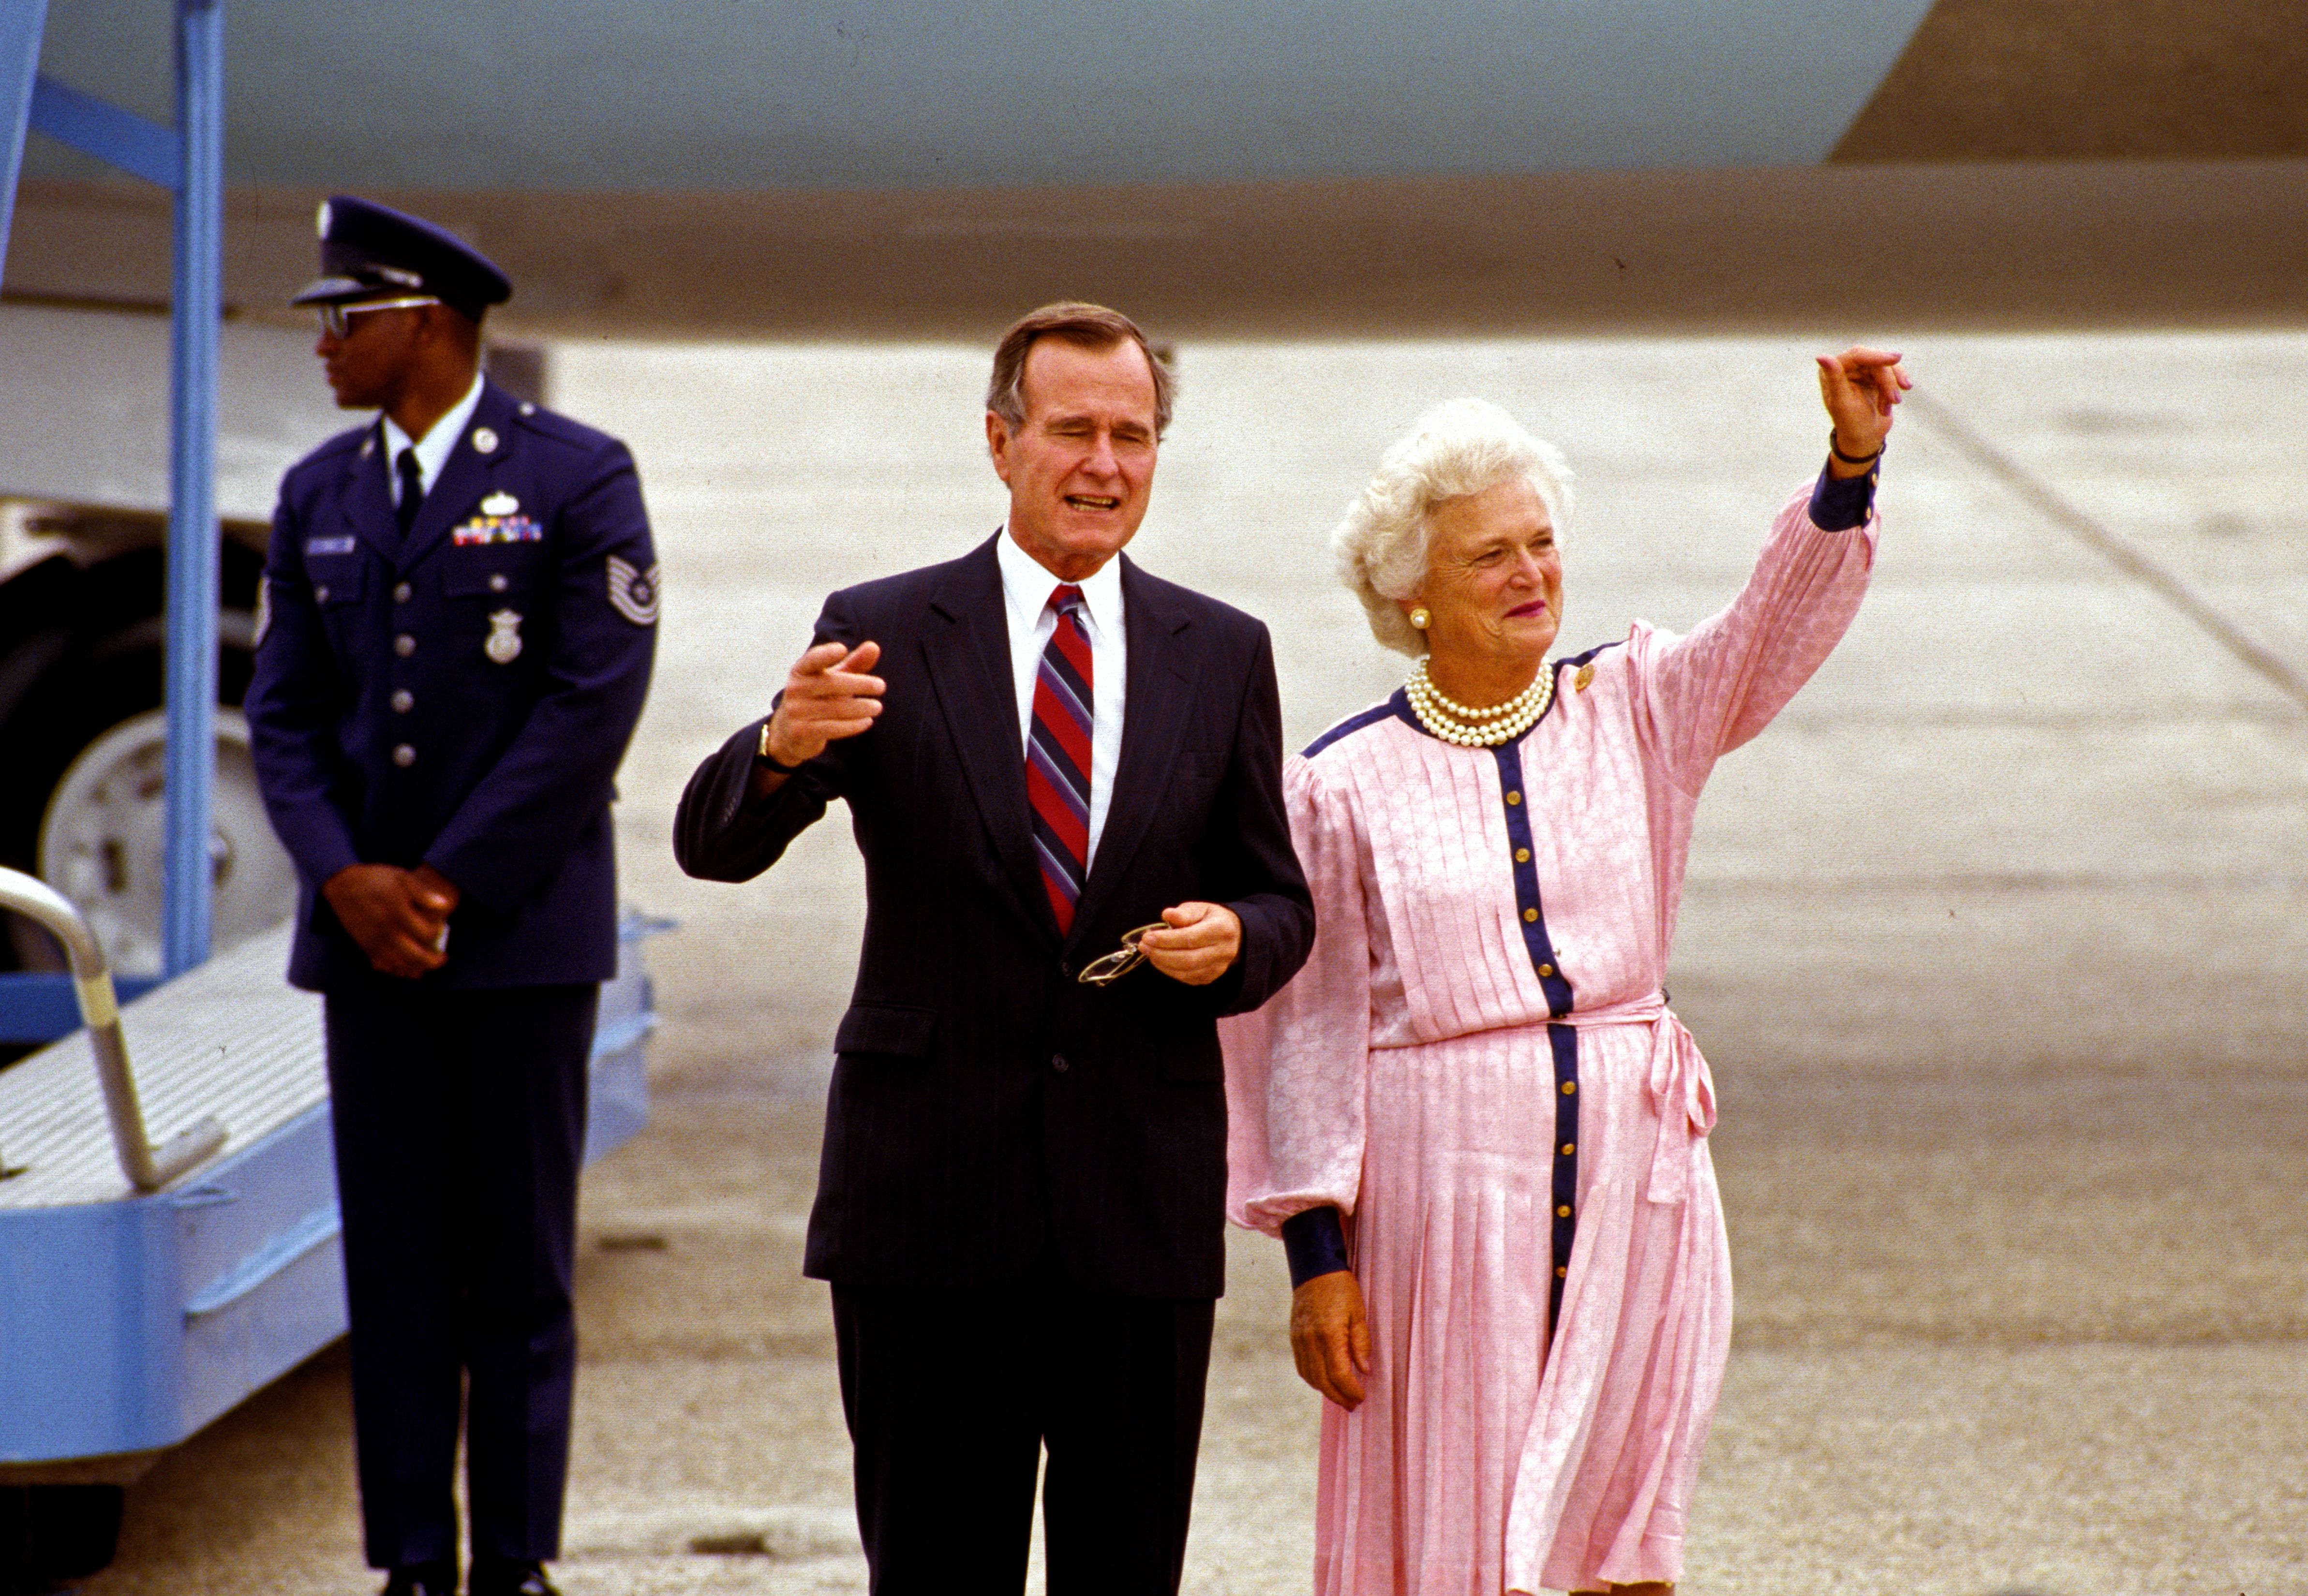 Photo shows George H.W. Bush and Barbara Bush on the tarmac at the airport in 1988.